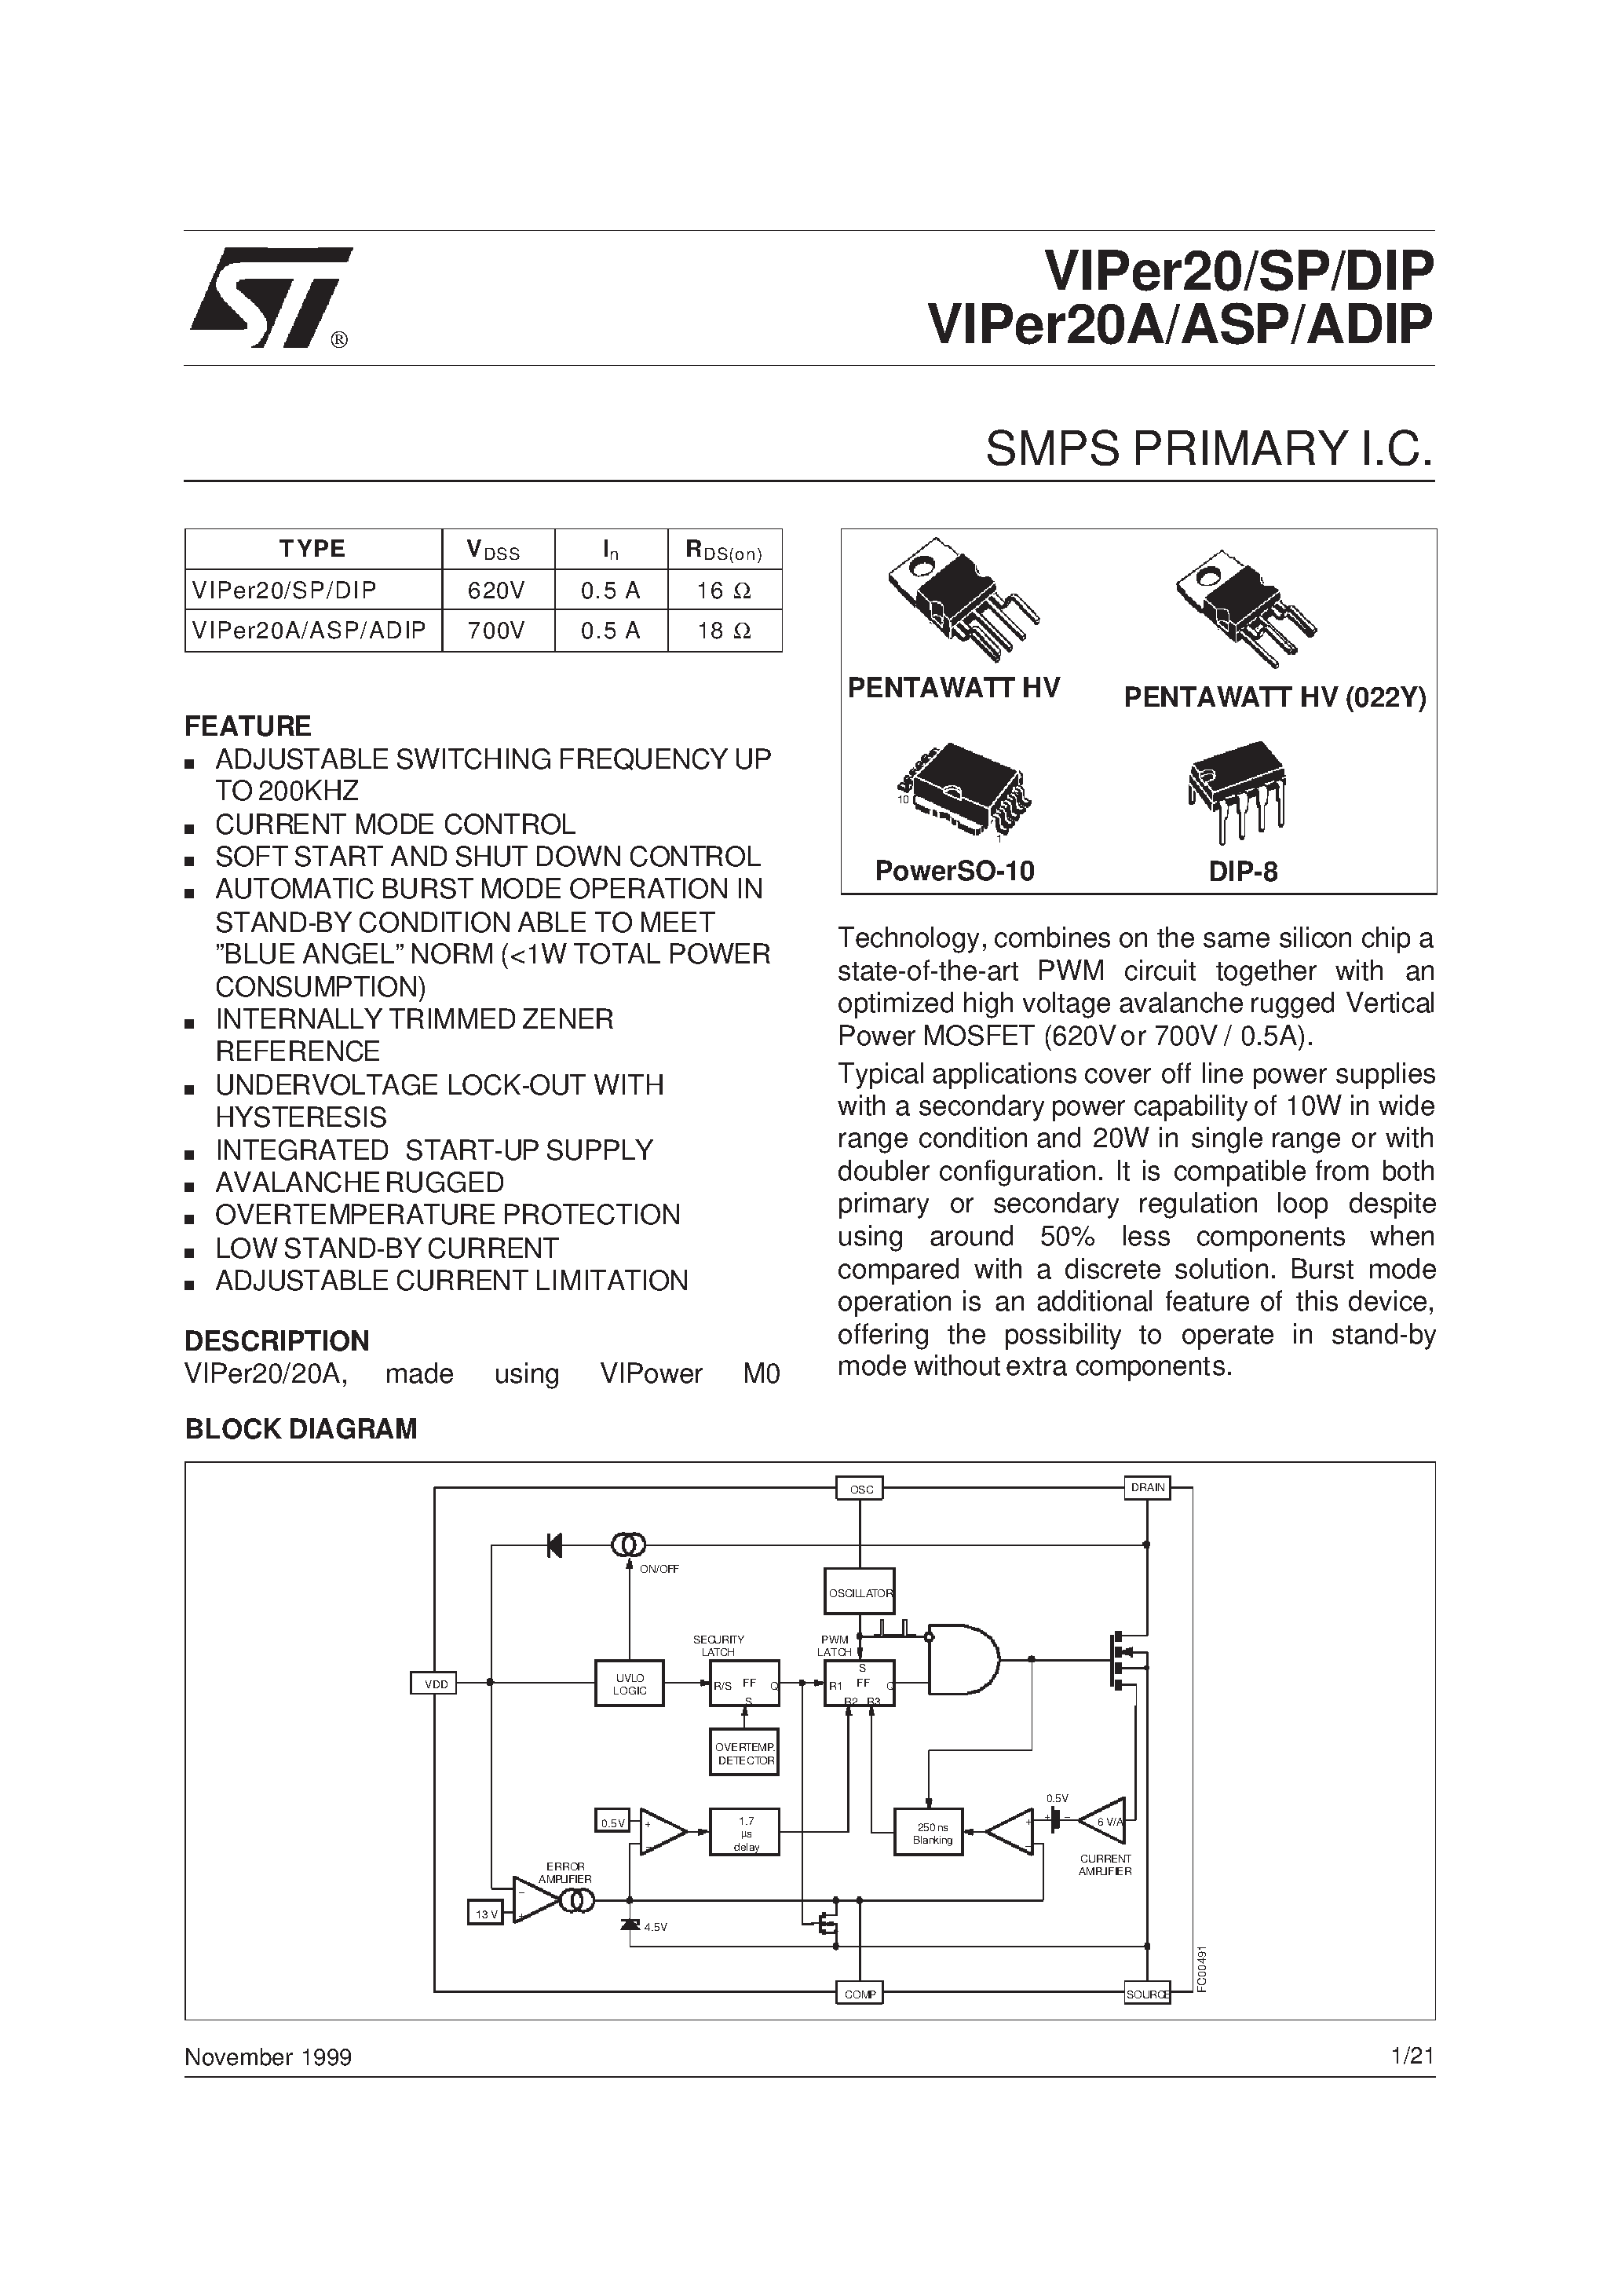 Datasheet VIPer20A - SMPS PRIMARY I.C. page 1